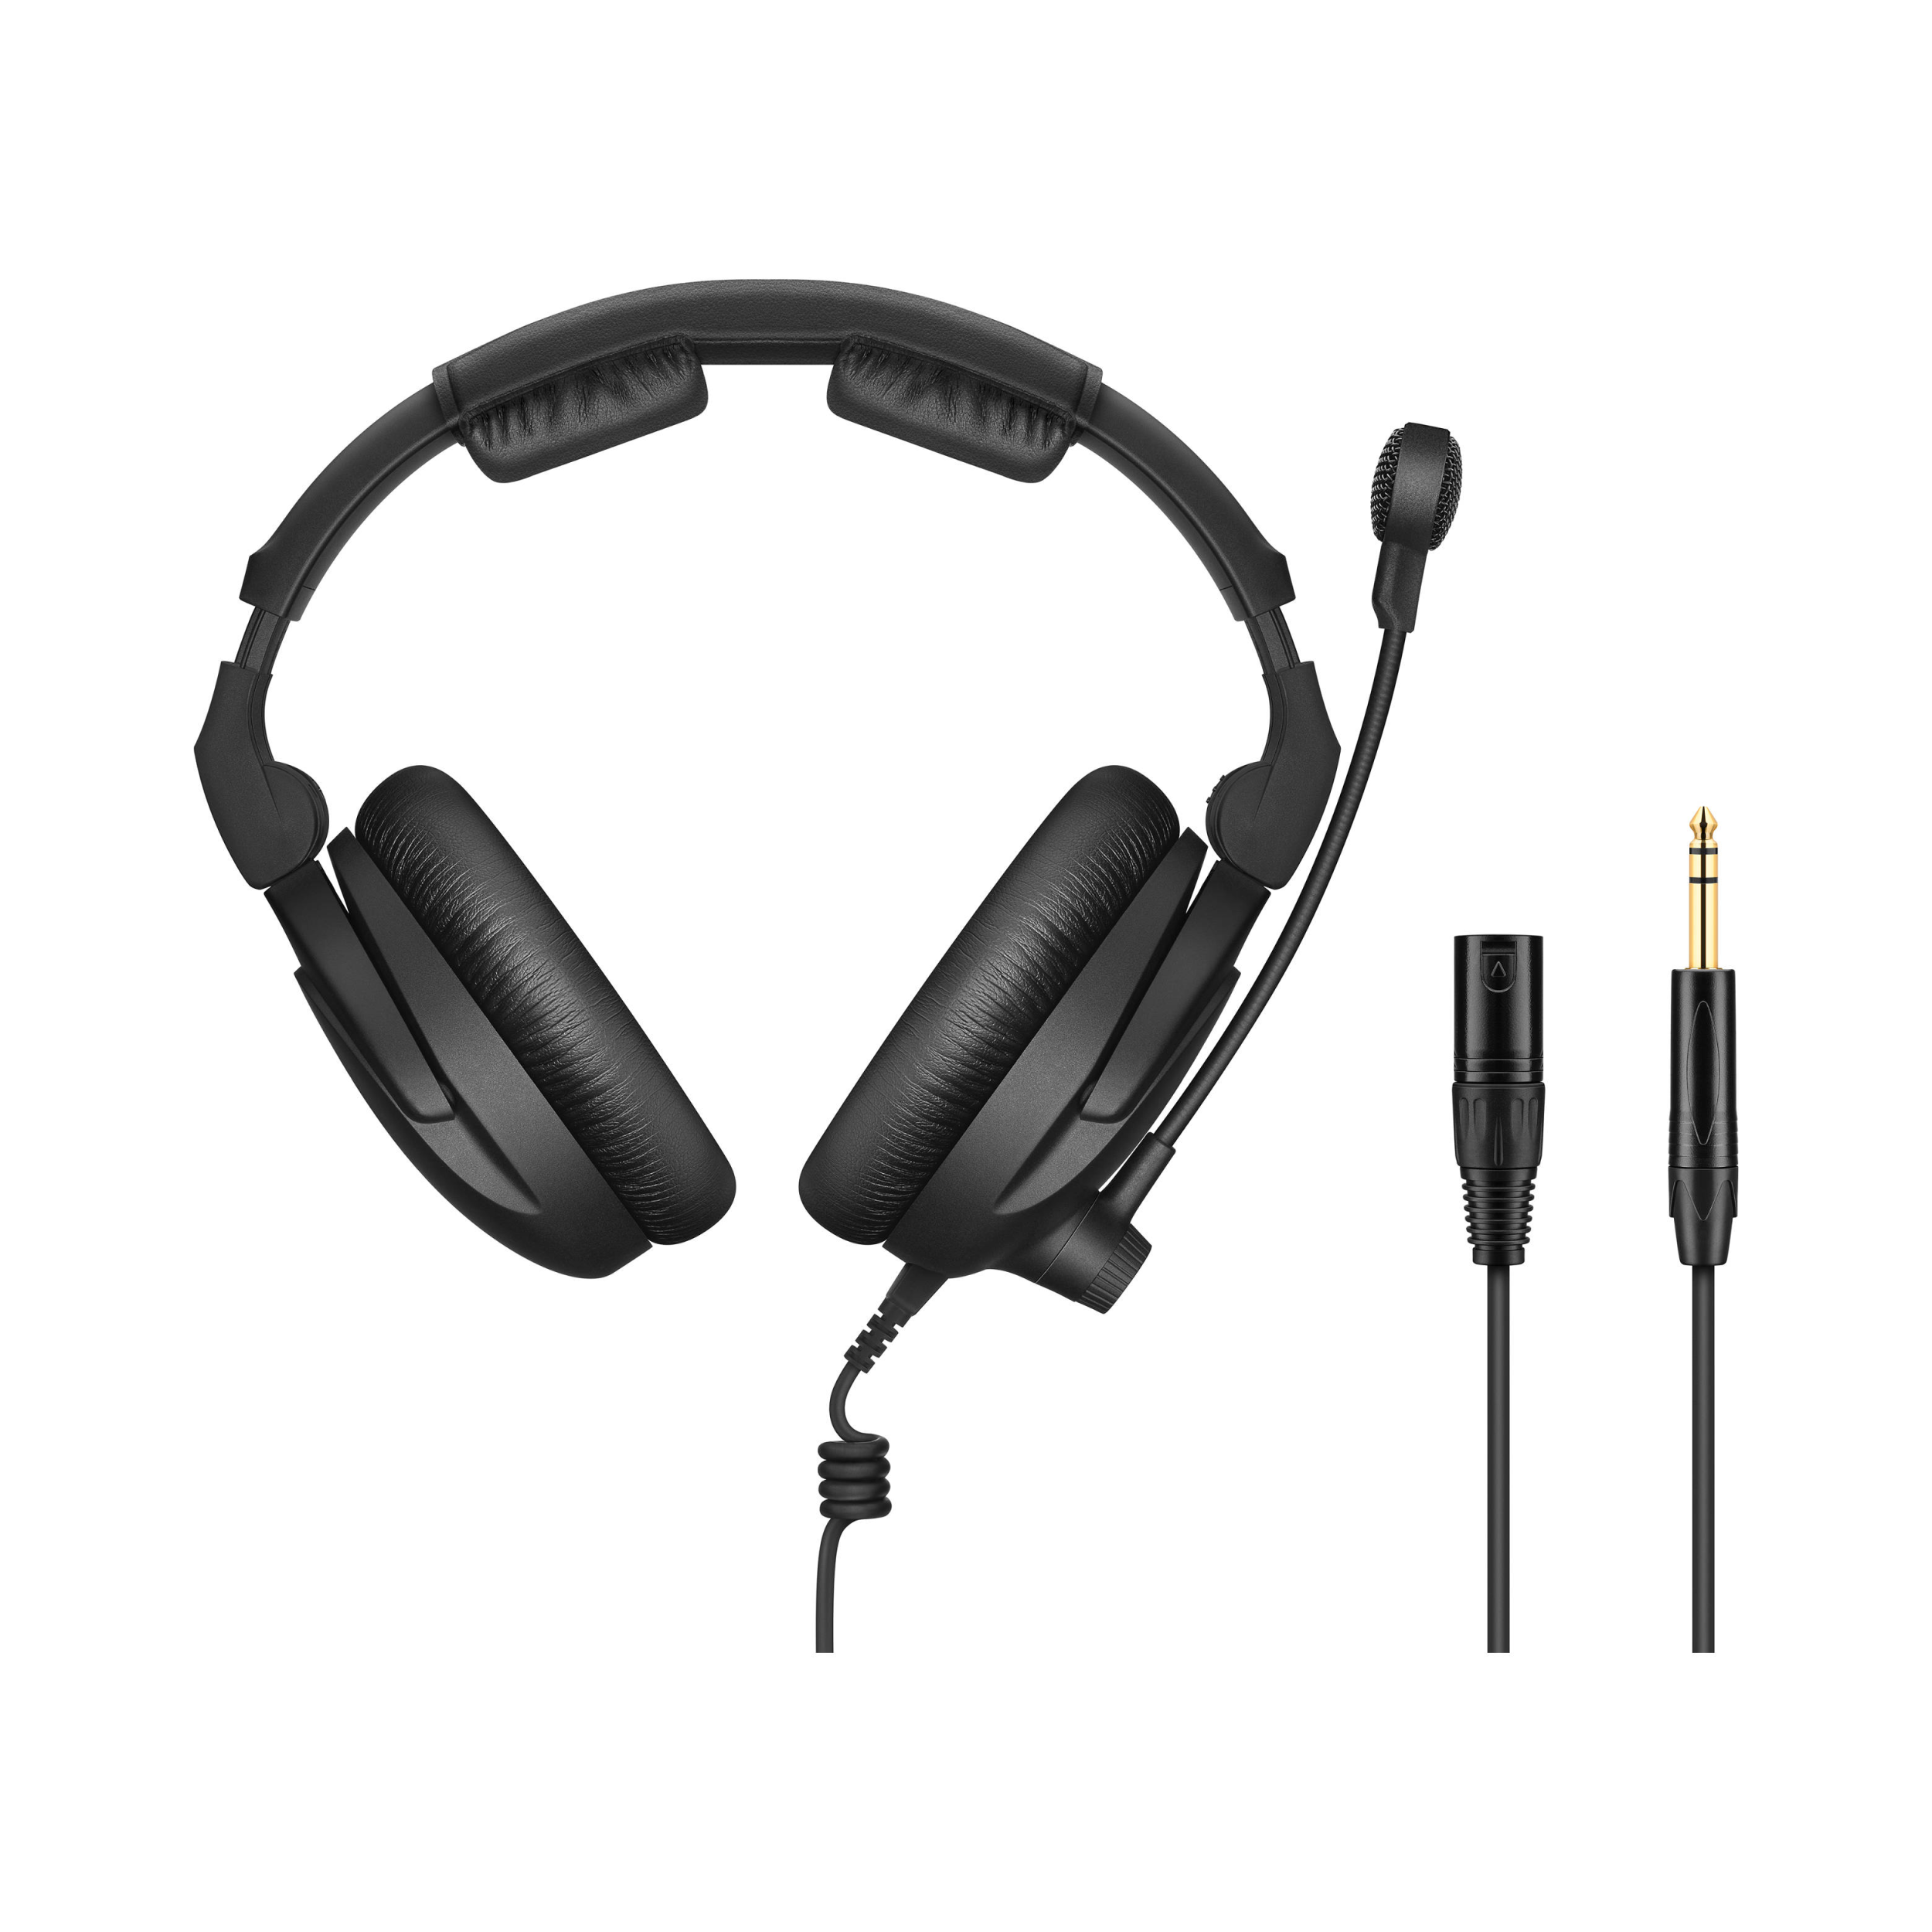 Sennheiser HMD 300 XQ-2 Headset with Boom Microphone & Cable with XLR and 1/4" Jacks - Damaged Box